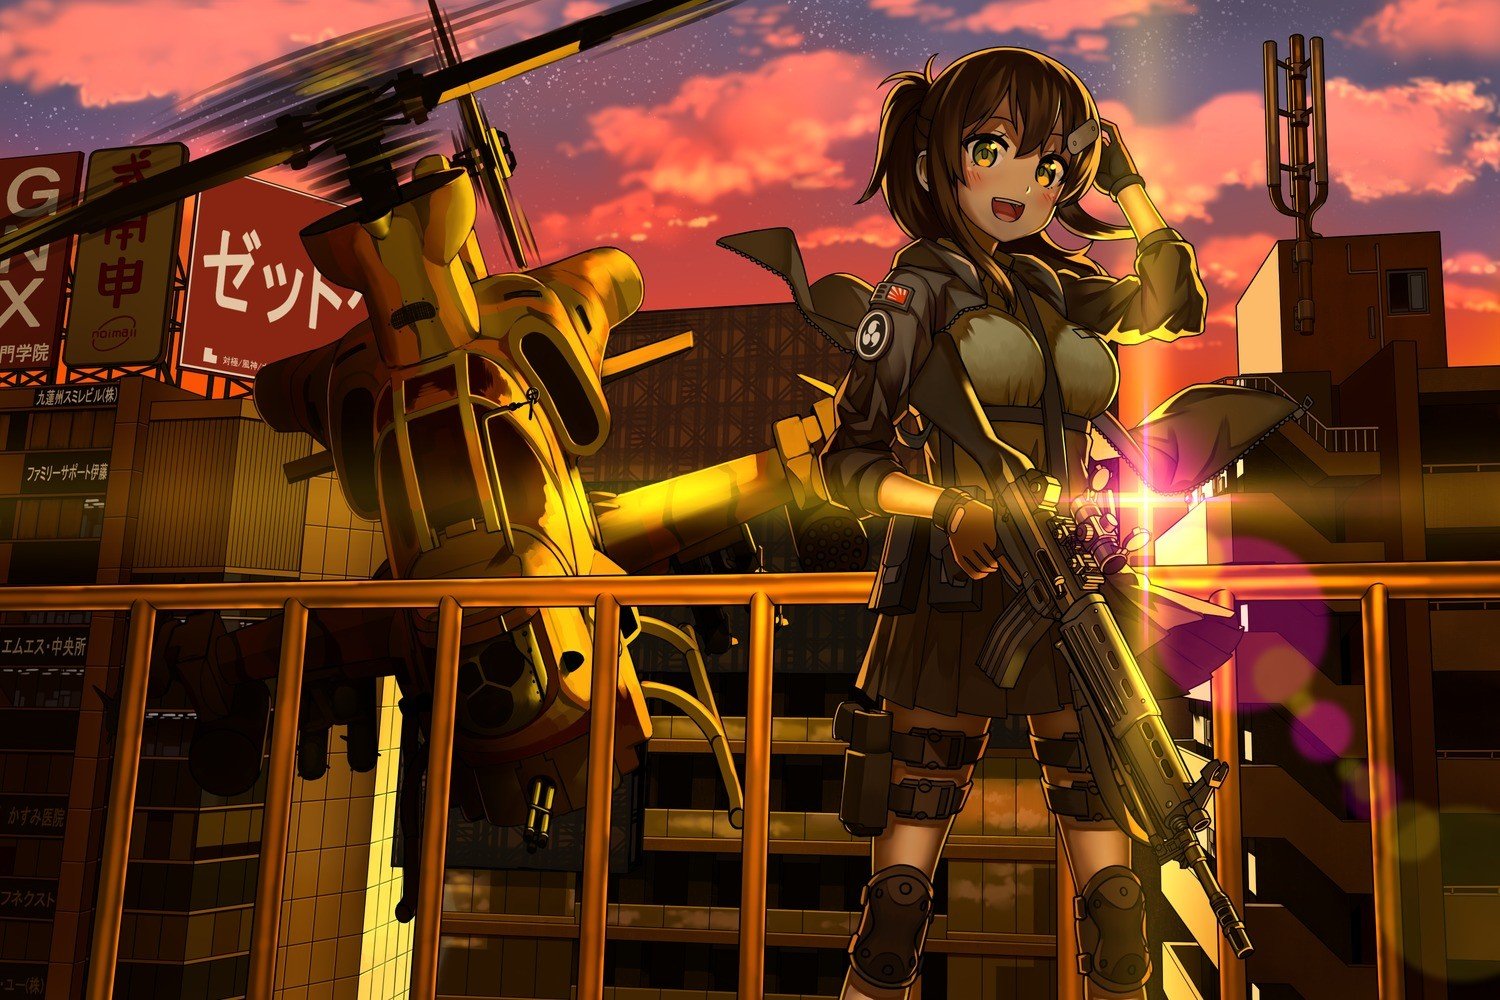 anime girls, Helicopters, Sunset, Weapon, Building Wallpaper